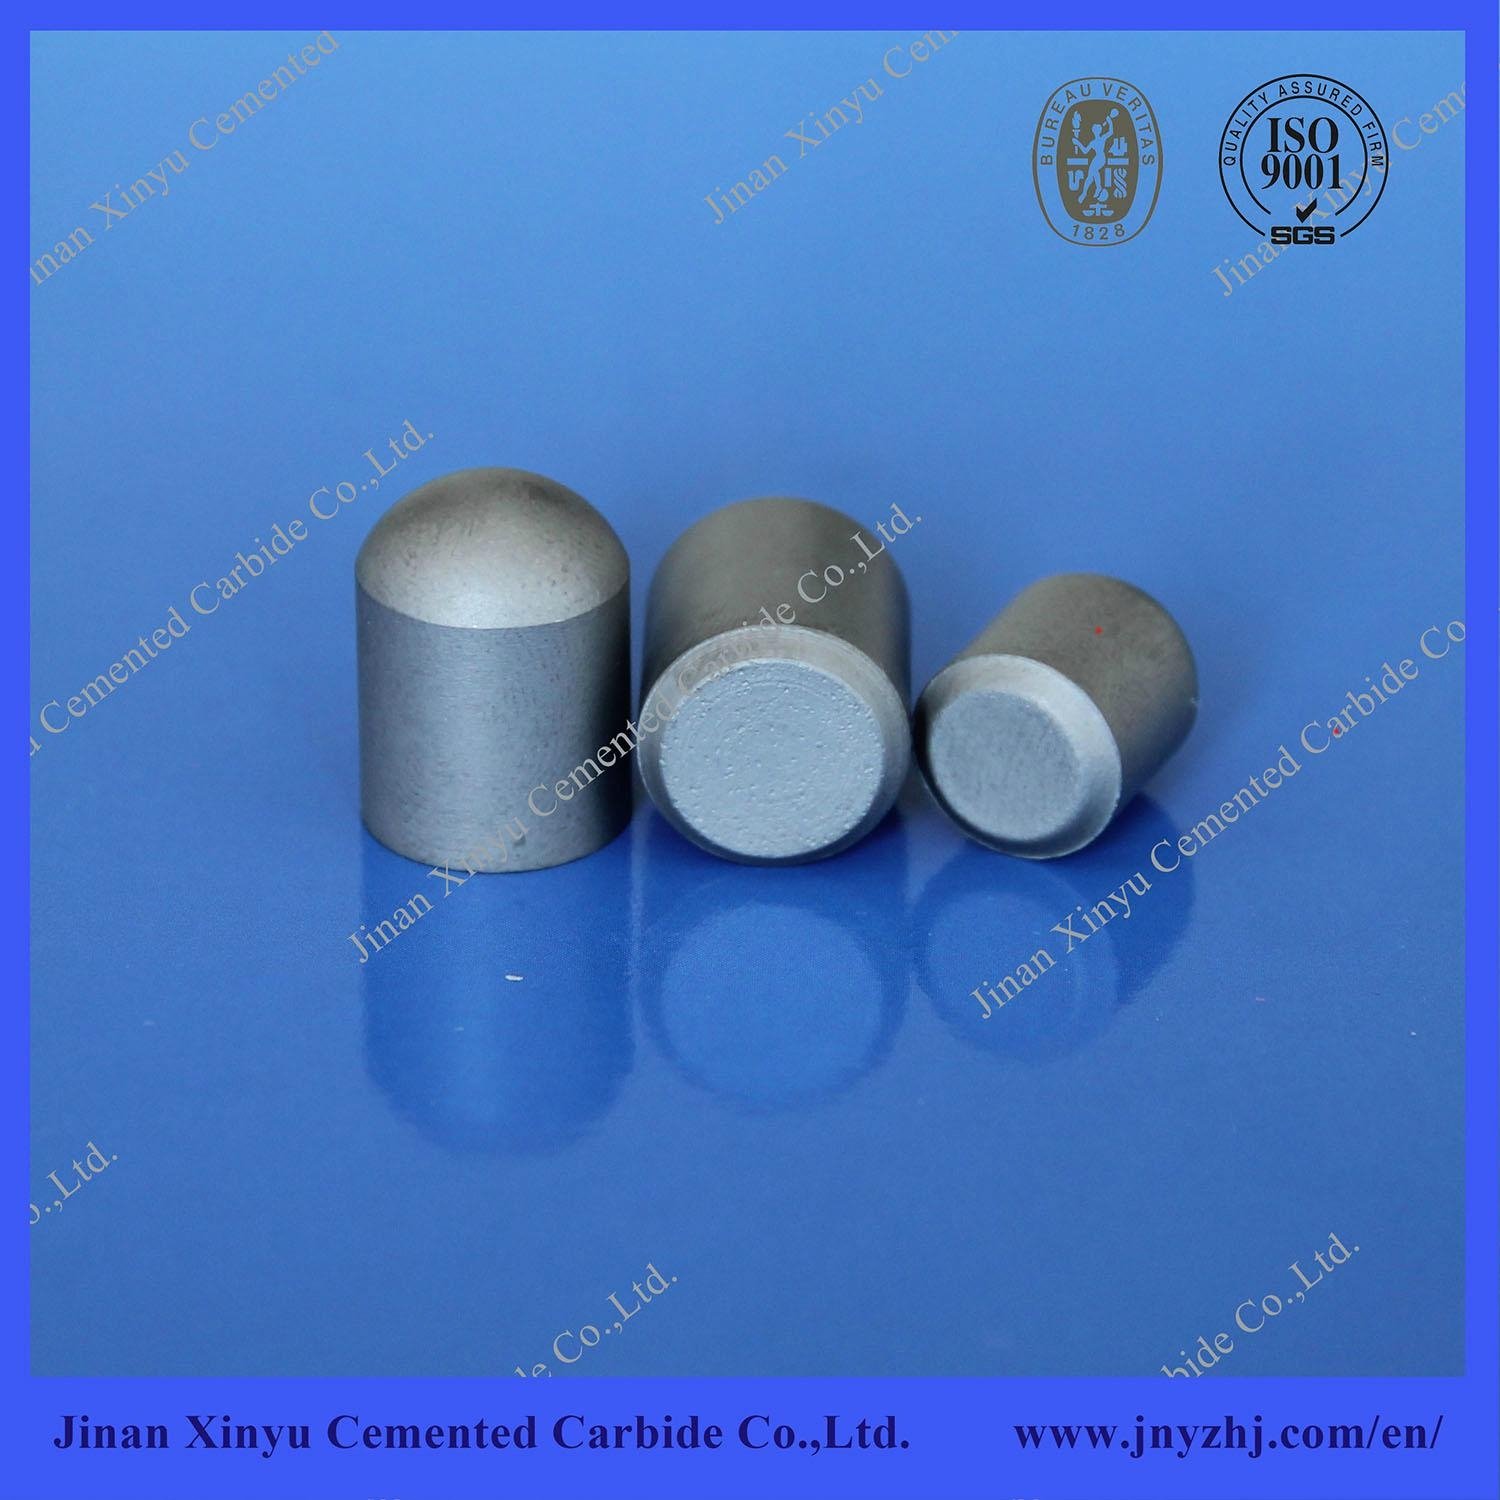 Cemented Carbide Buttons 2